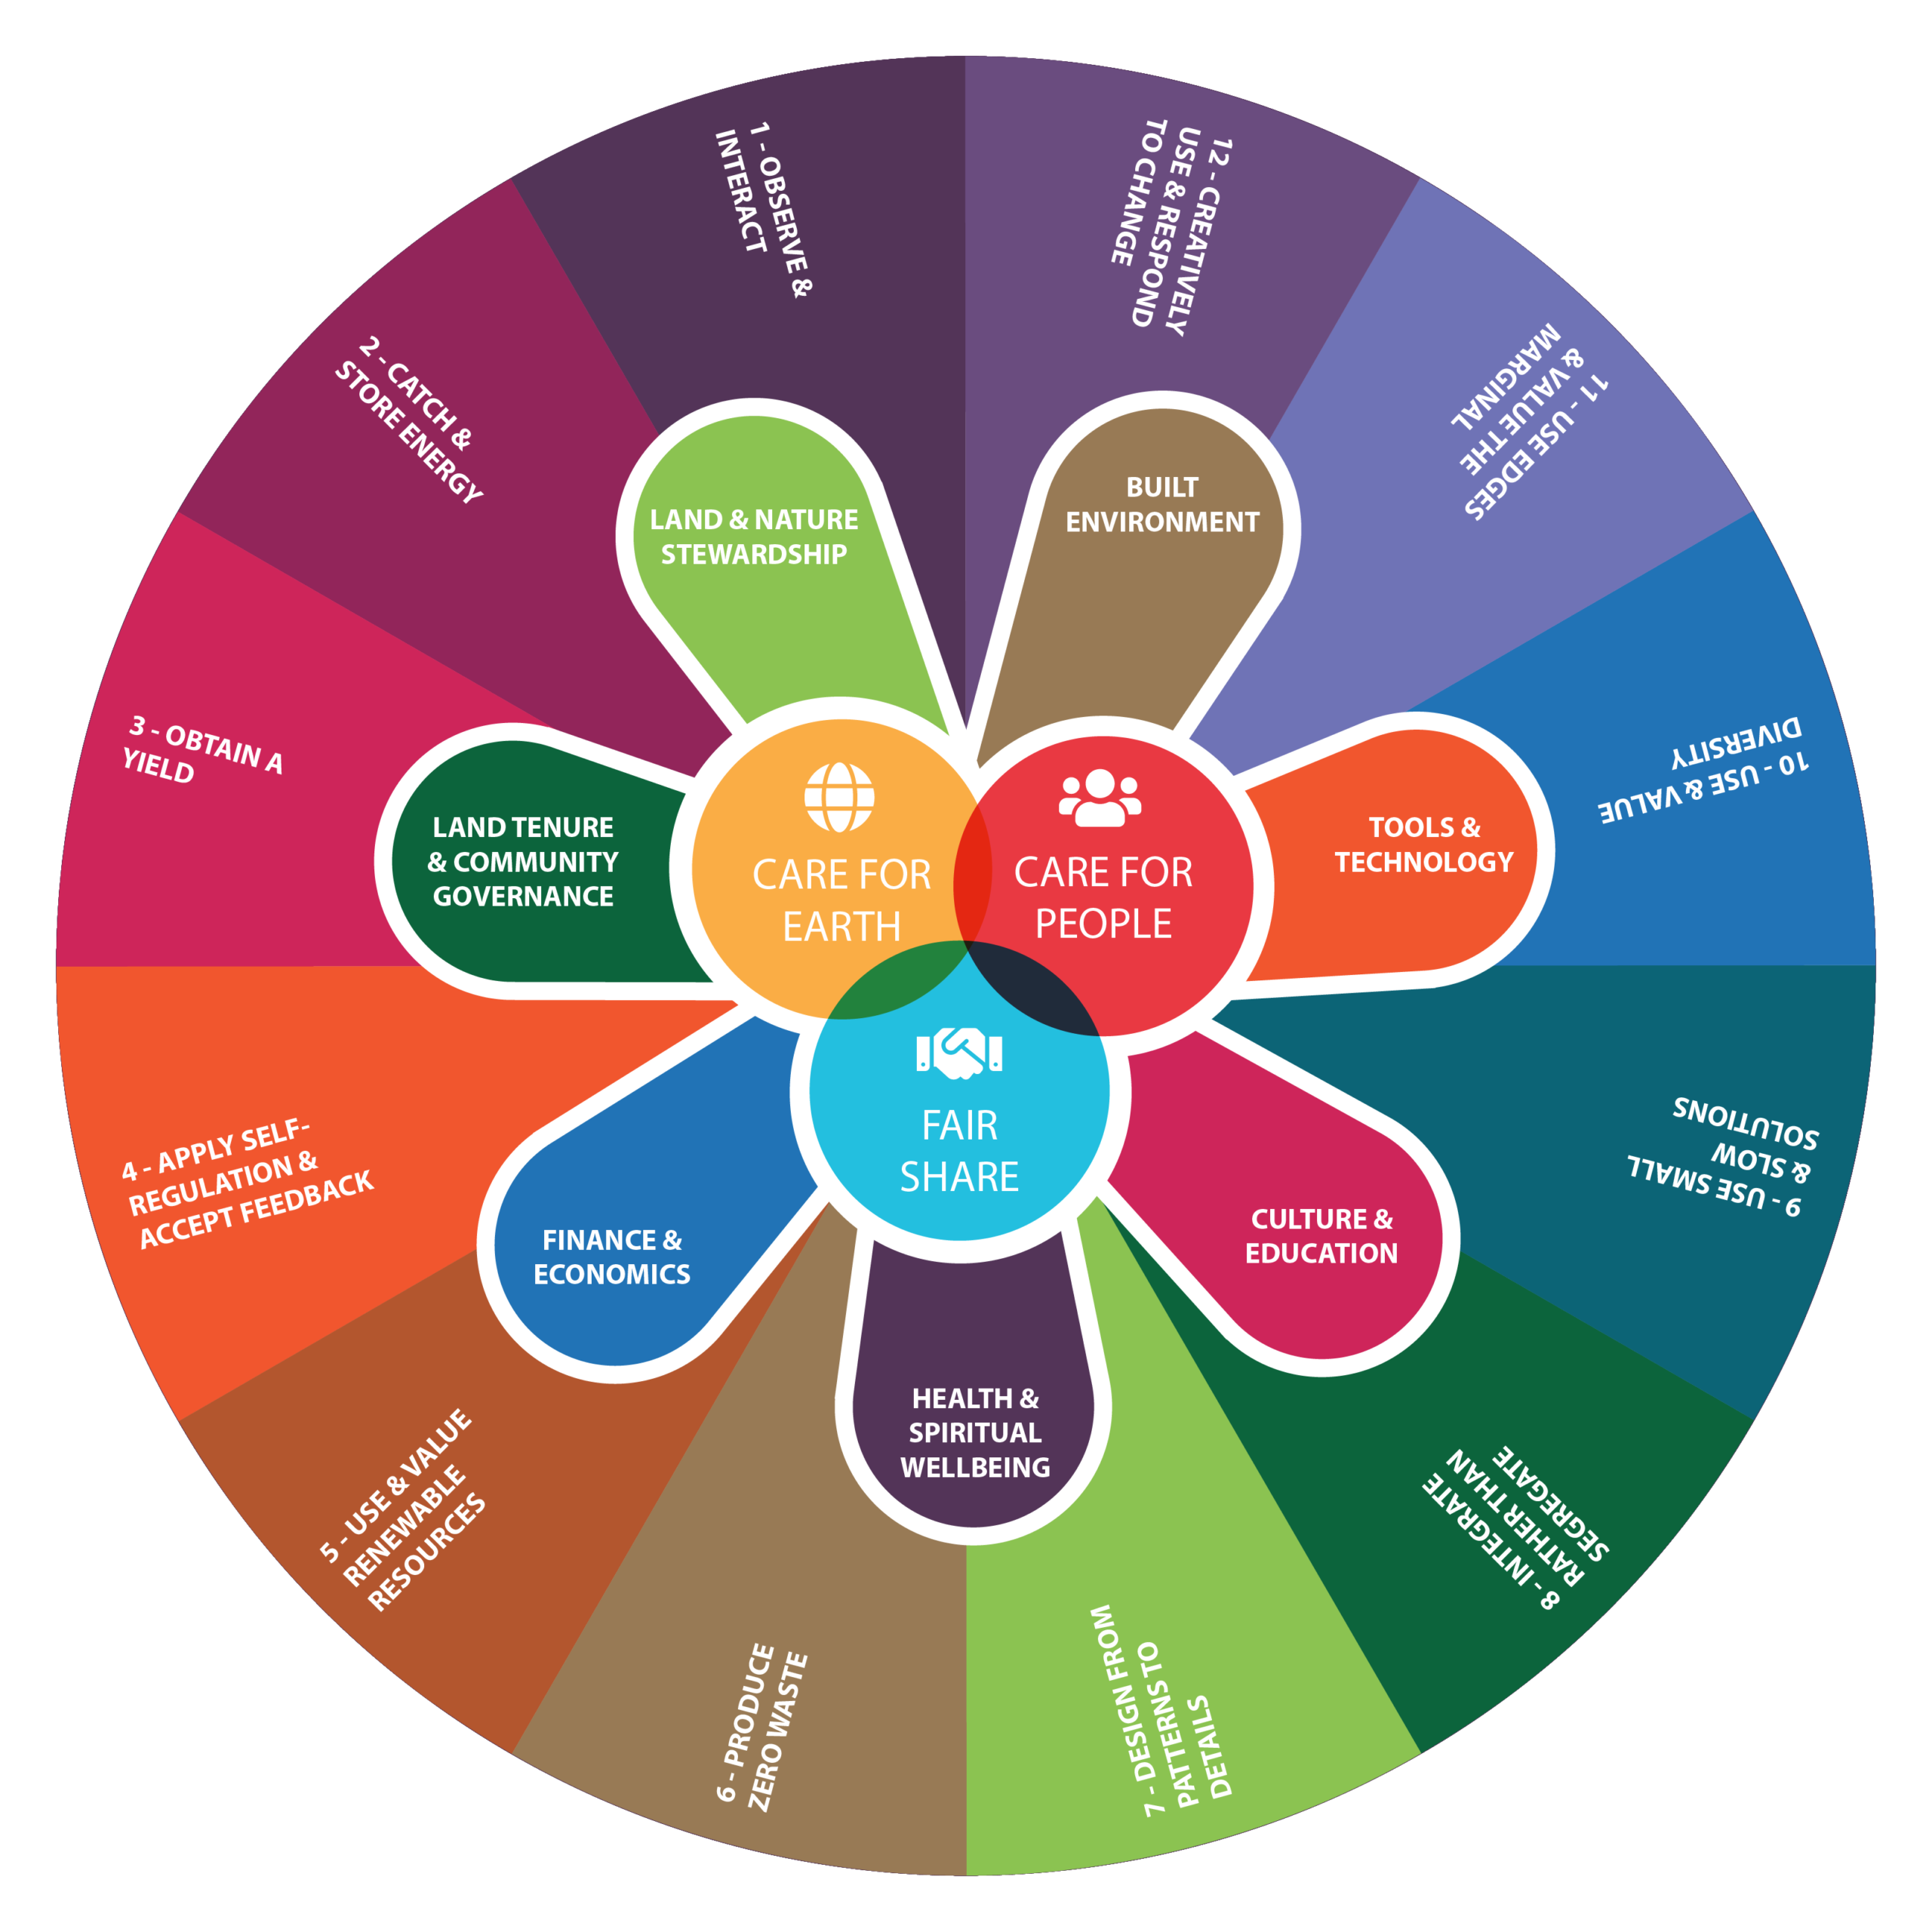 The Permaculture Wheel